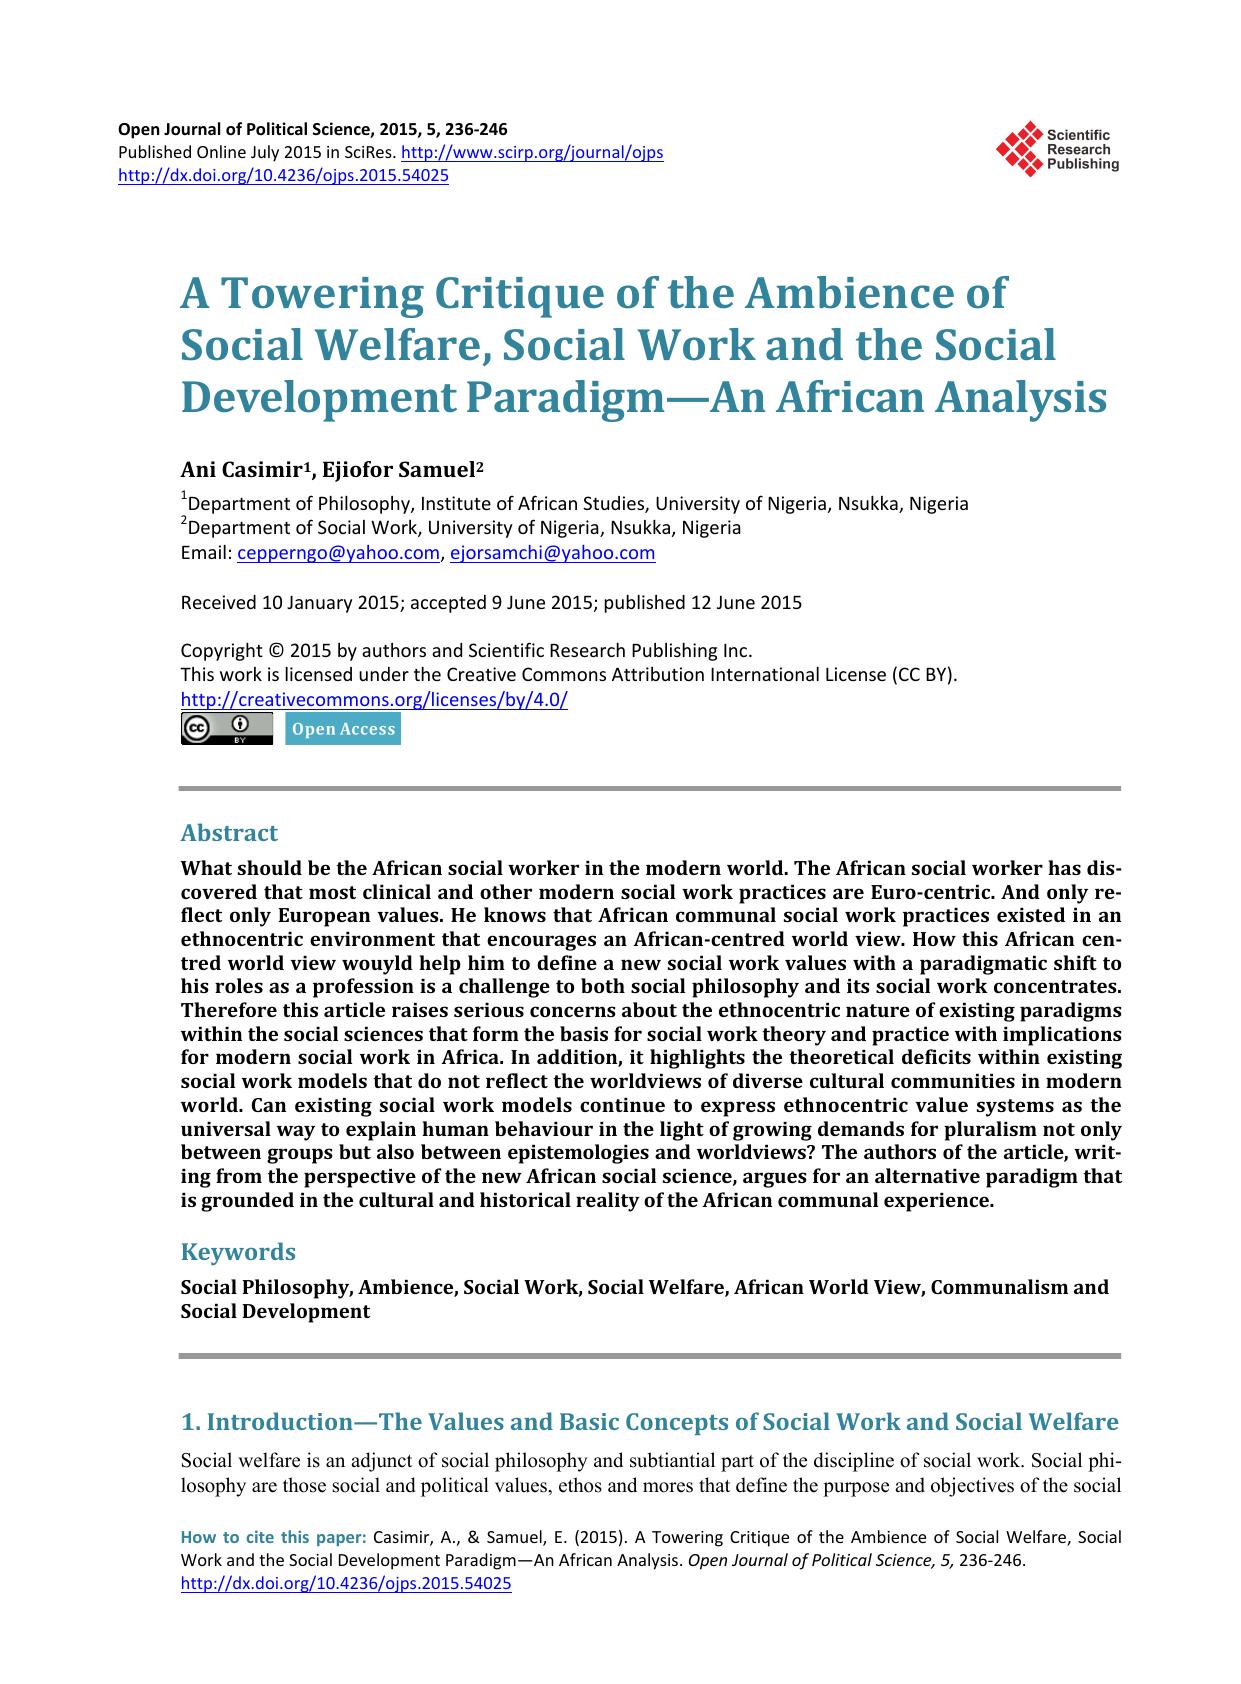 A Towering Critique of the Ambience of Social Welfare, Social Work and the Social Development Paradigm—An African Analysis